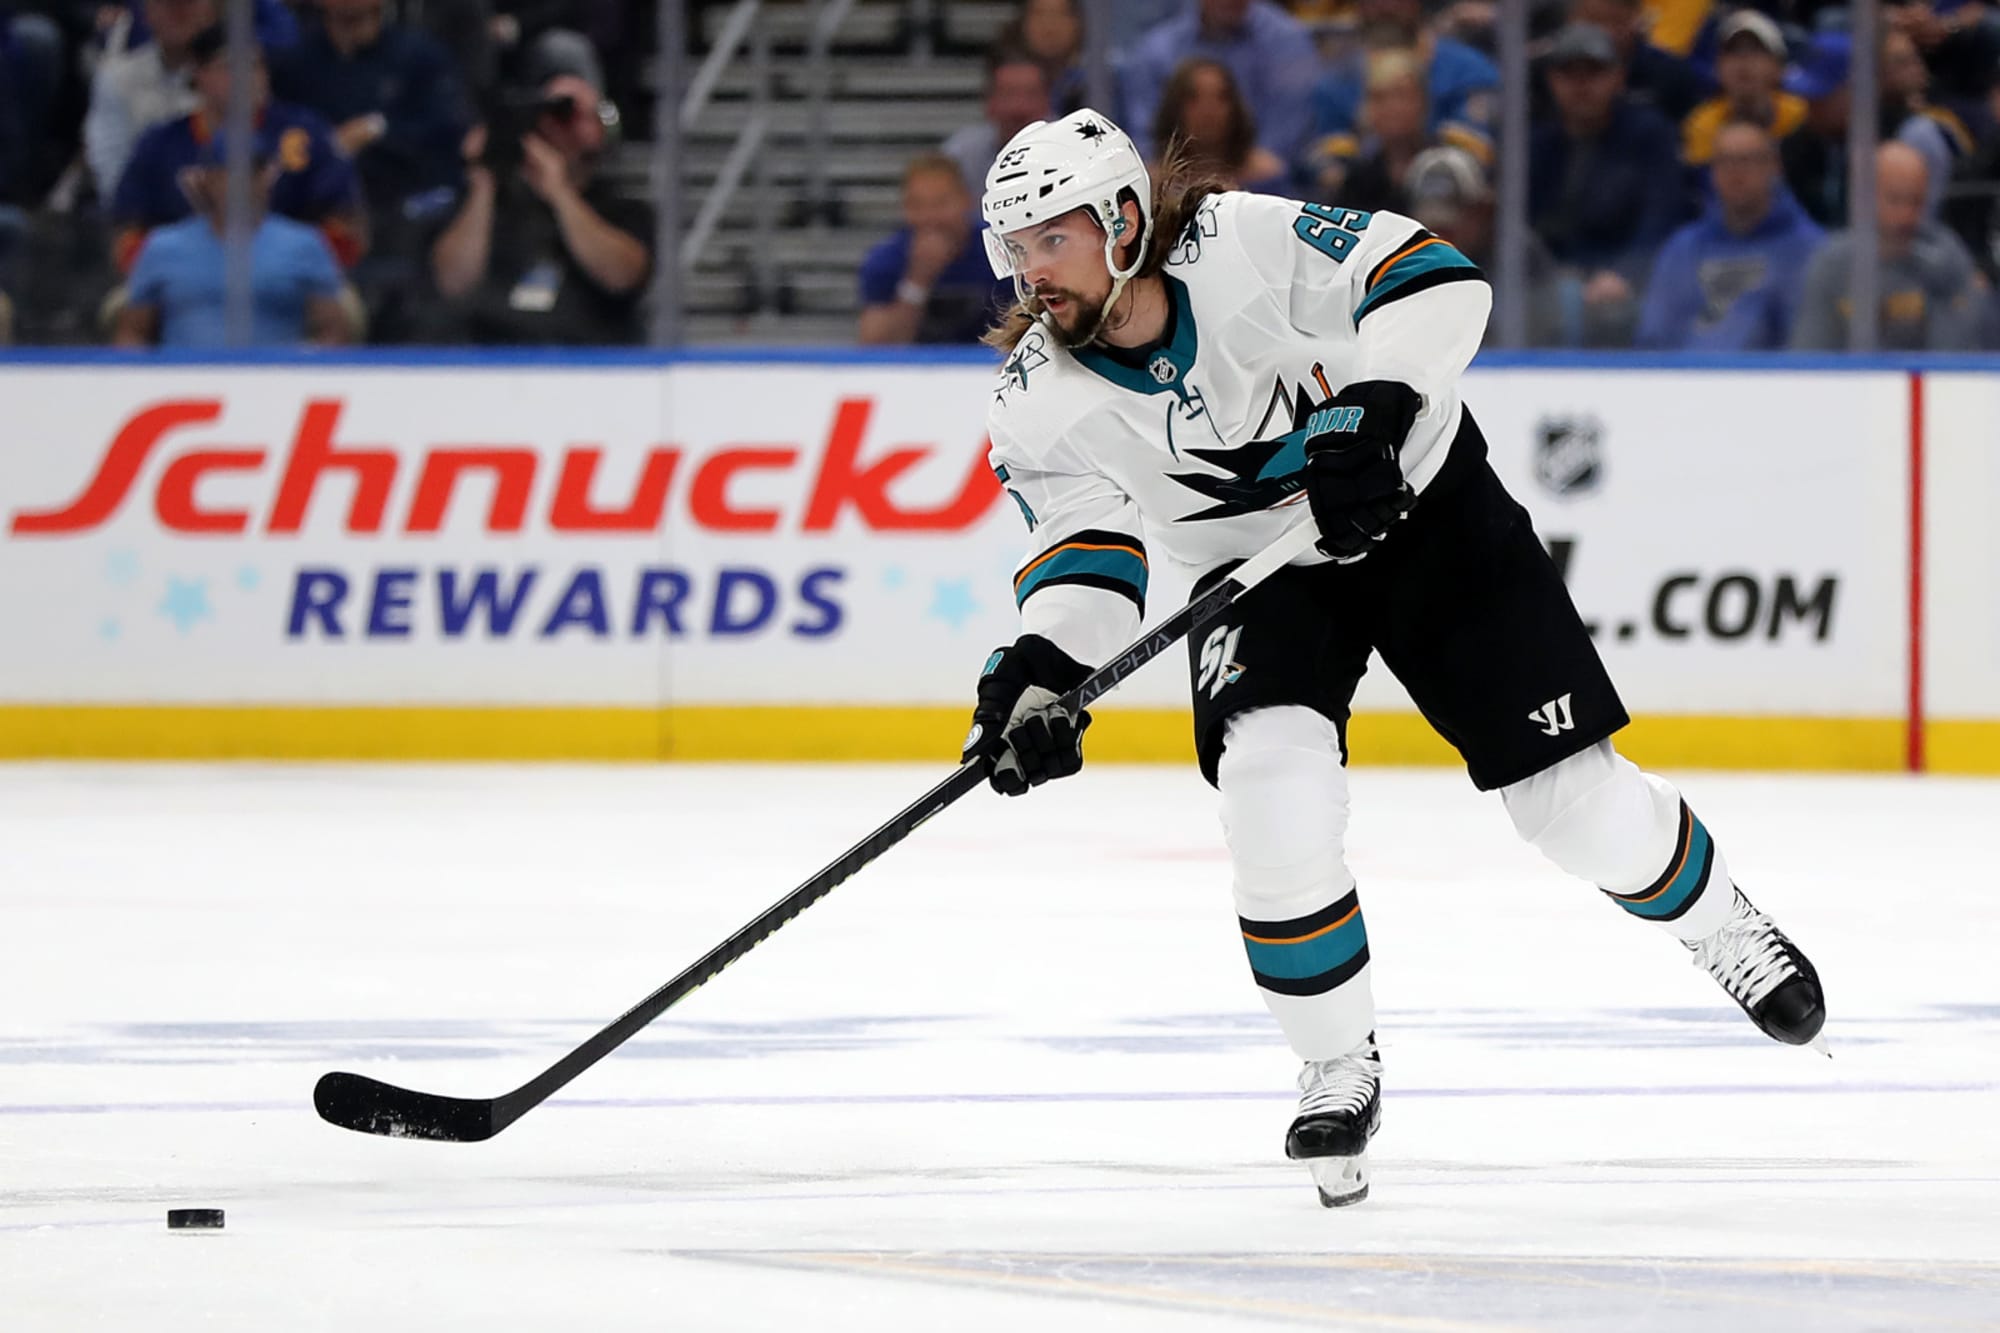 Penguins land Norris Trophy winner Karlsson in 3-way trade with Sharks,  Canadiens